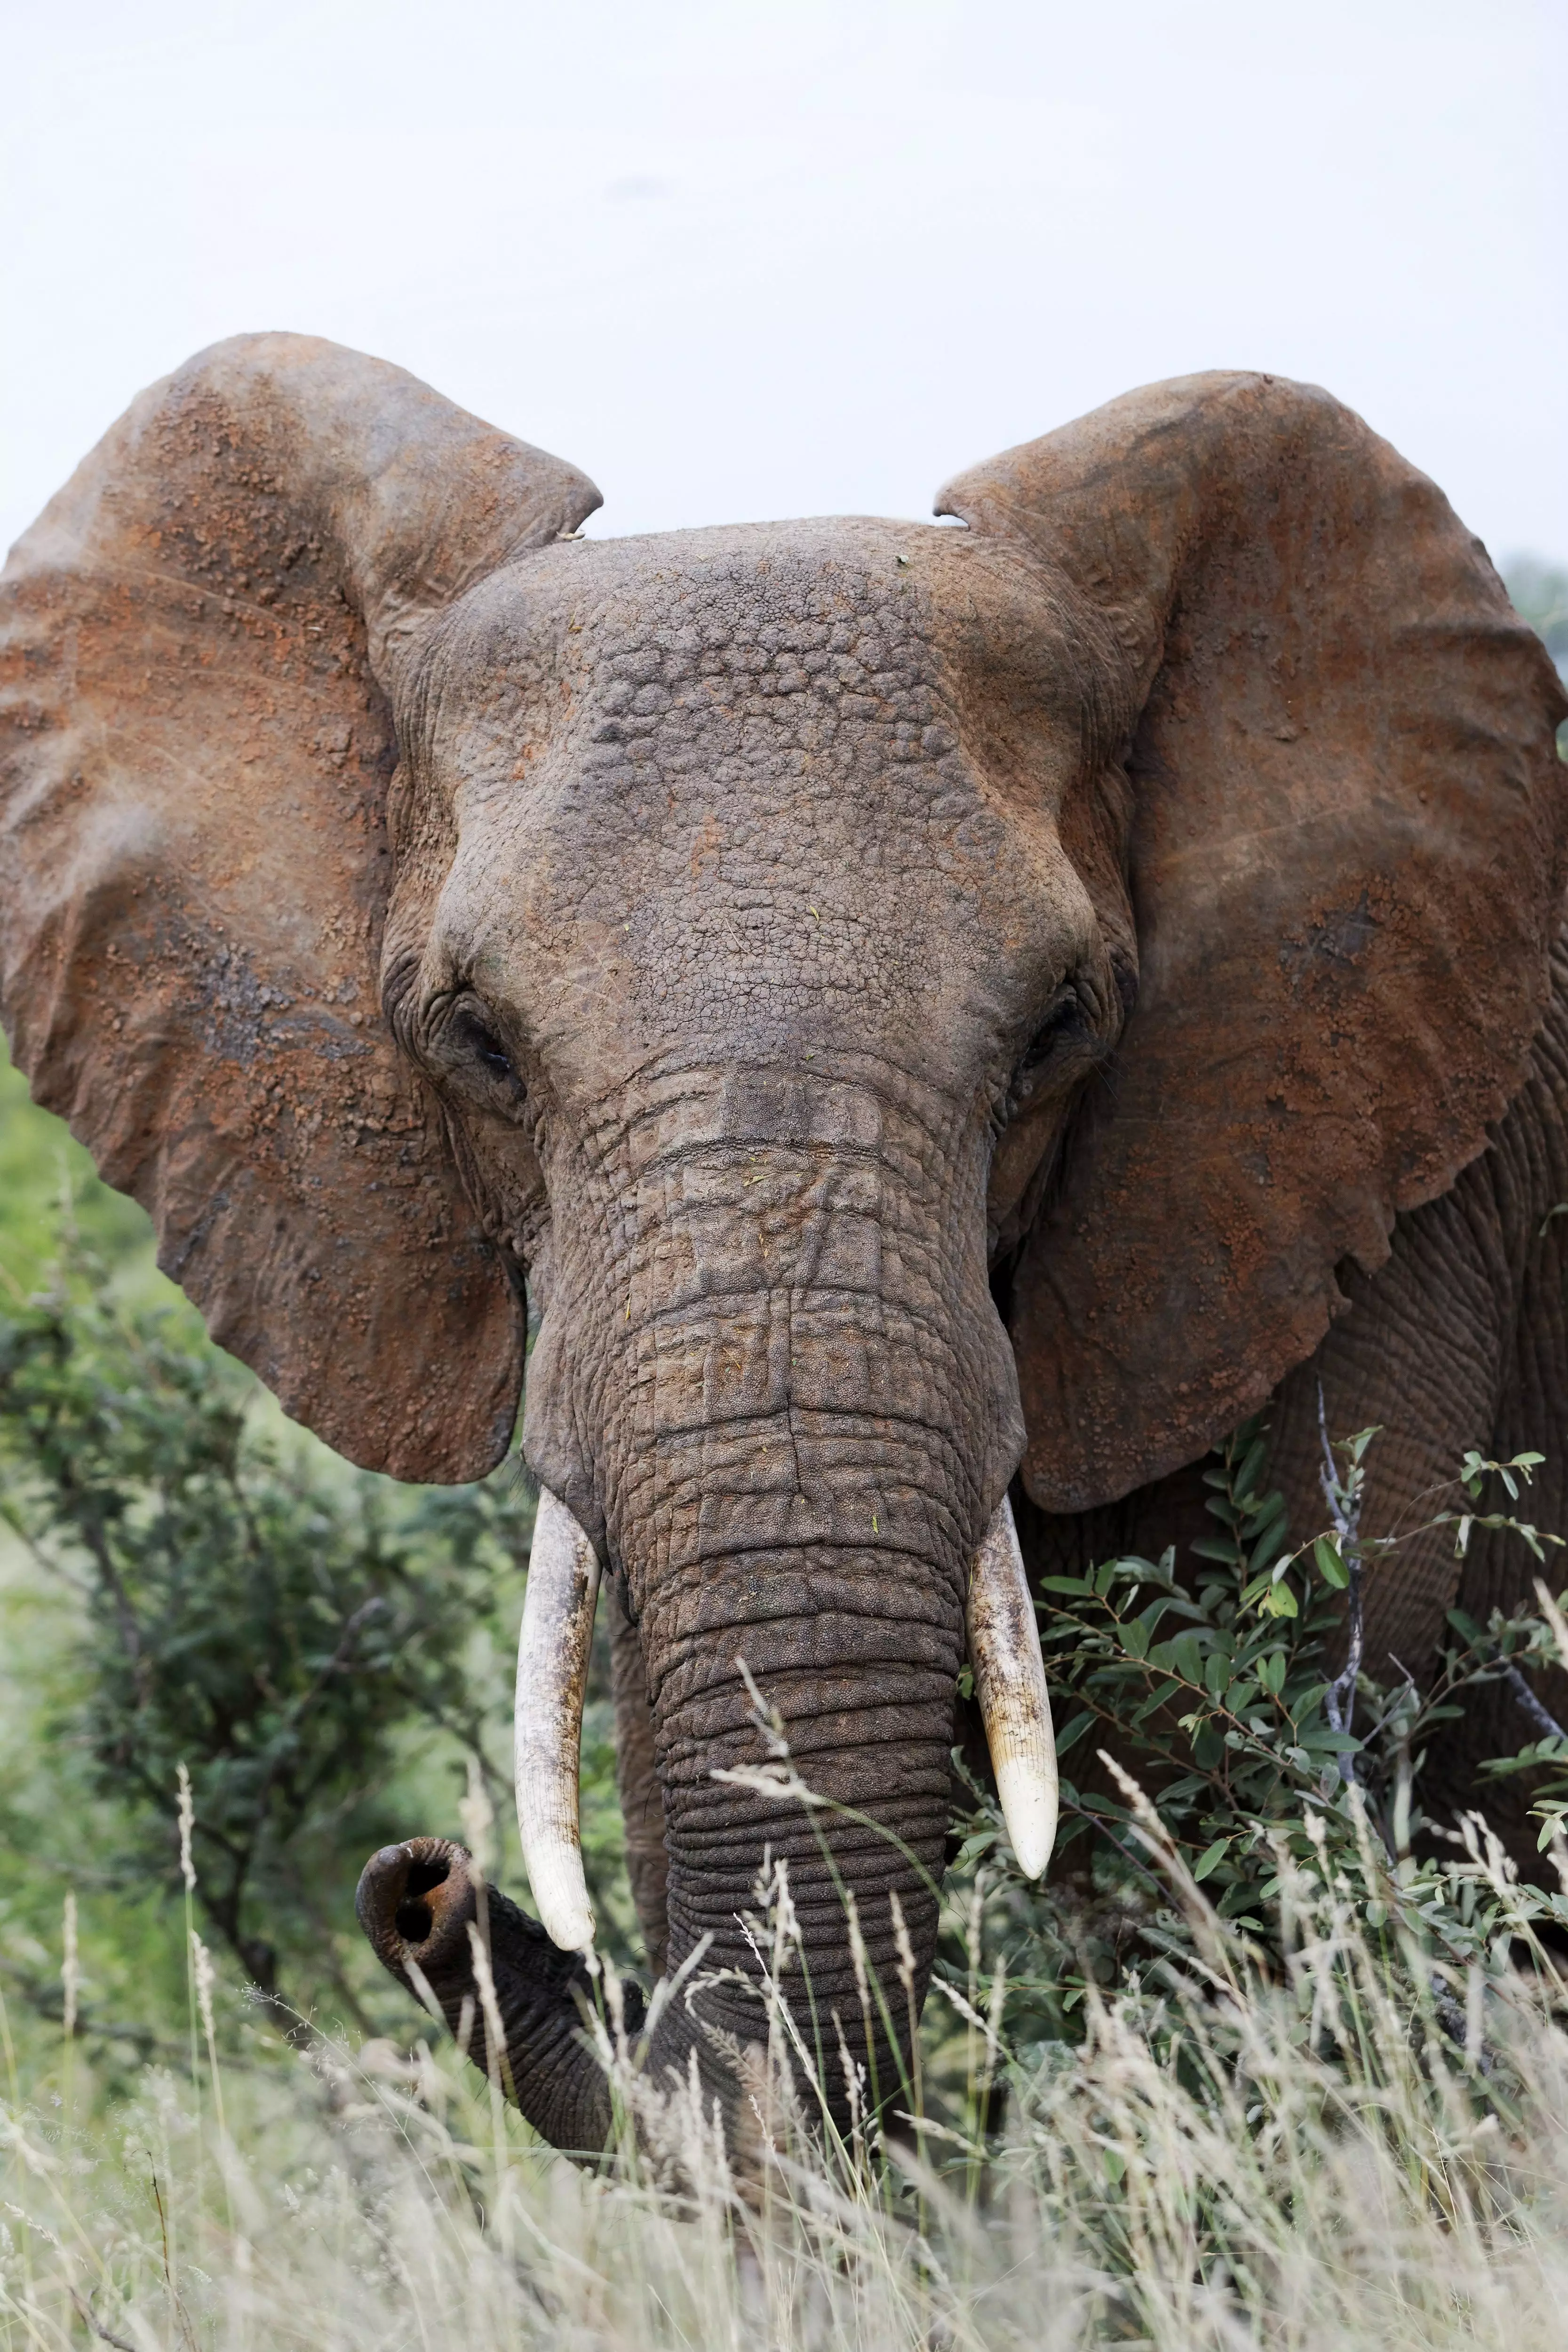 An elephant in South Africa.